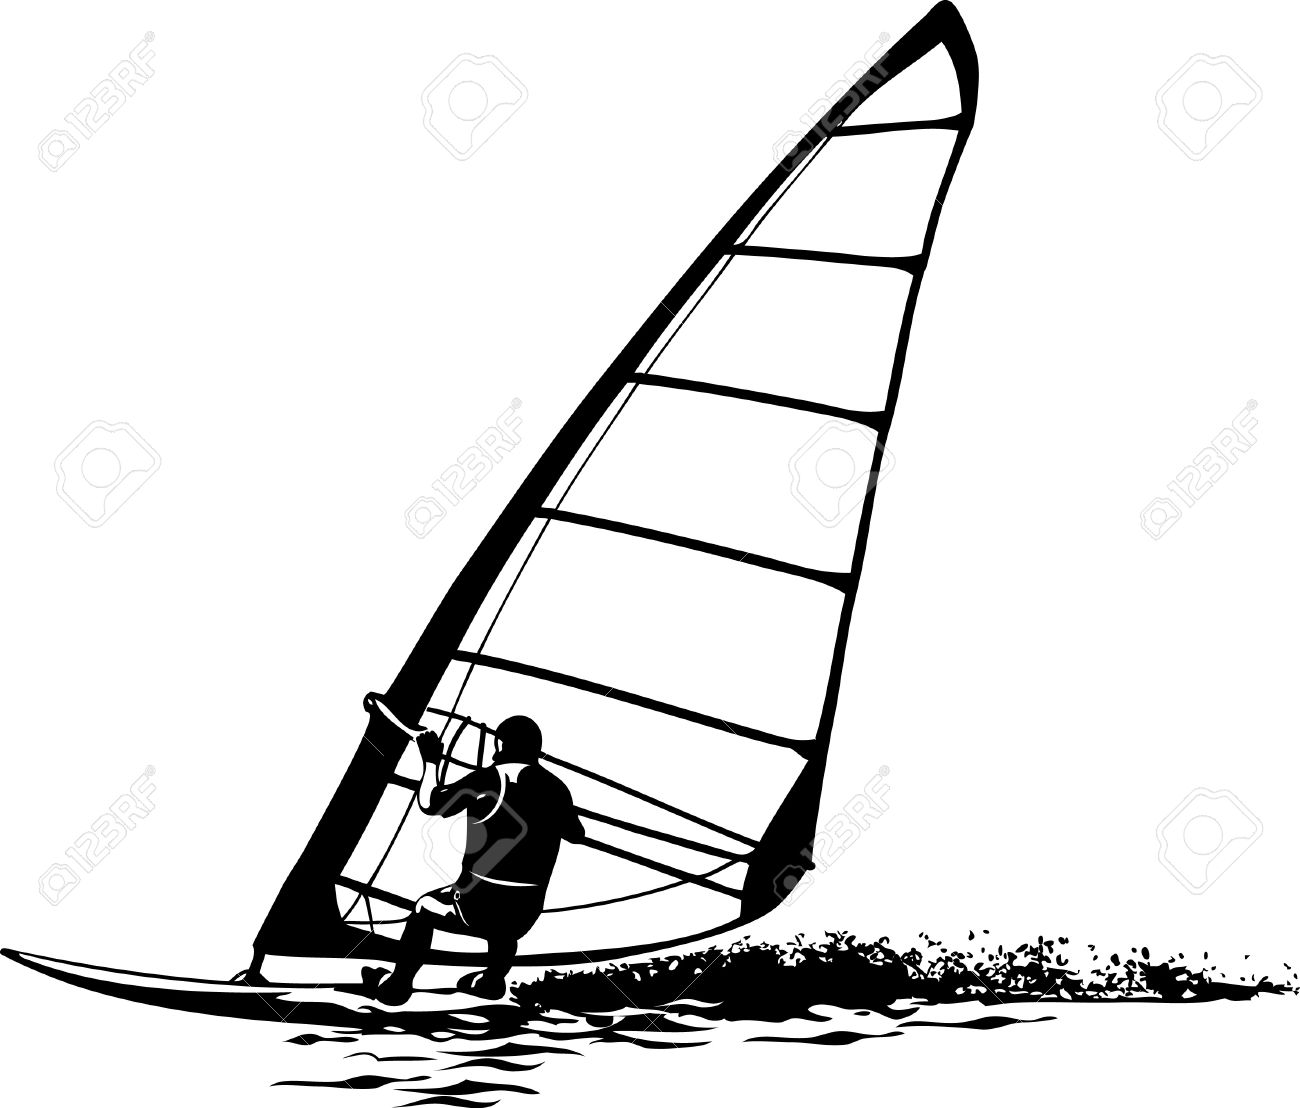 654 Windsurfer Stock Vector Illustration And Royalty Free.